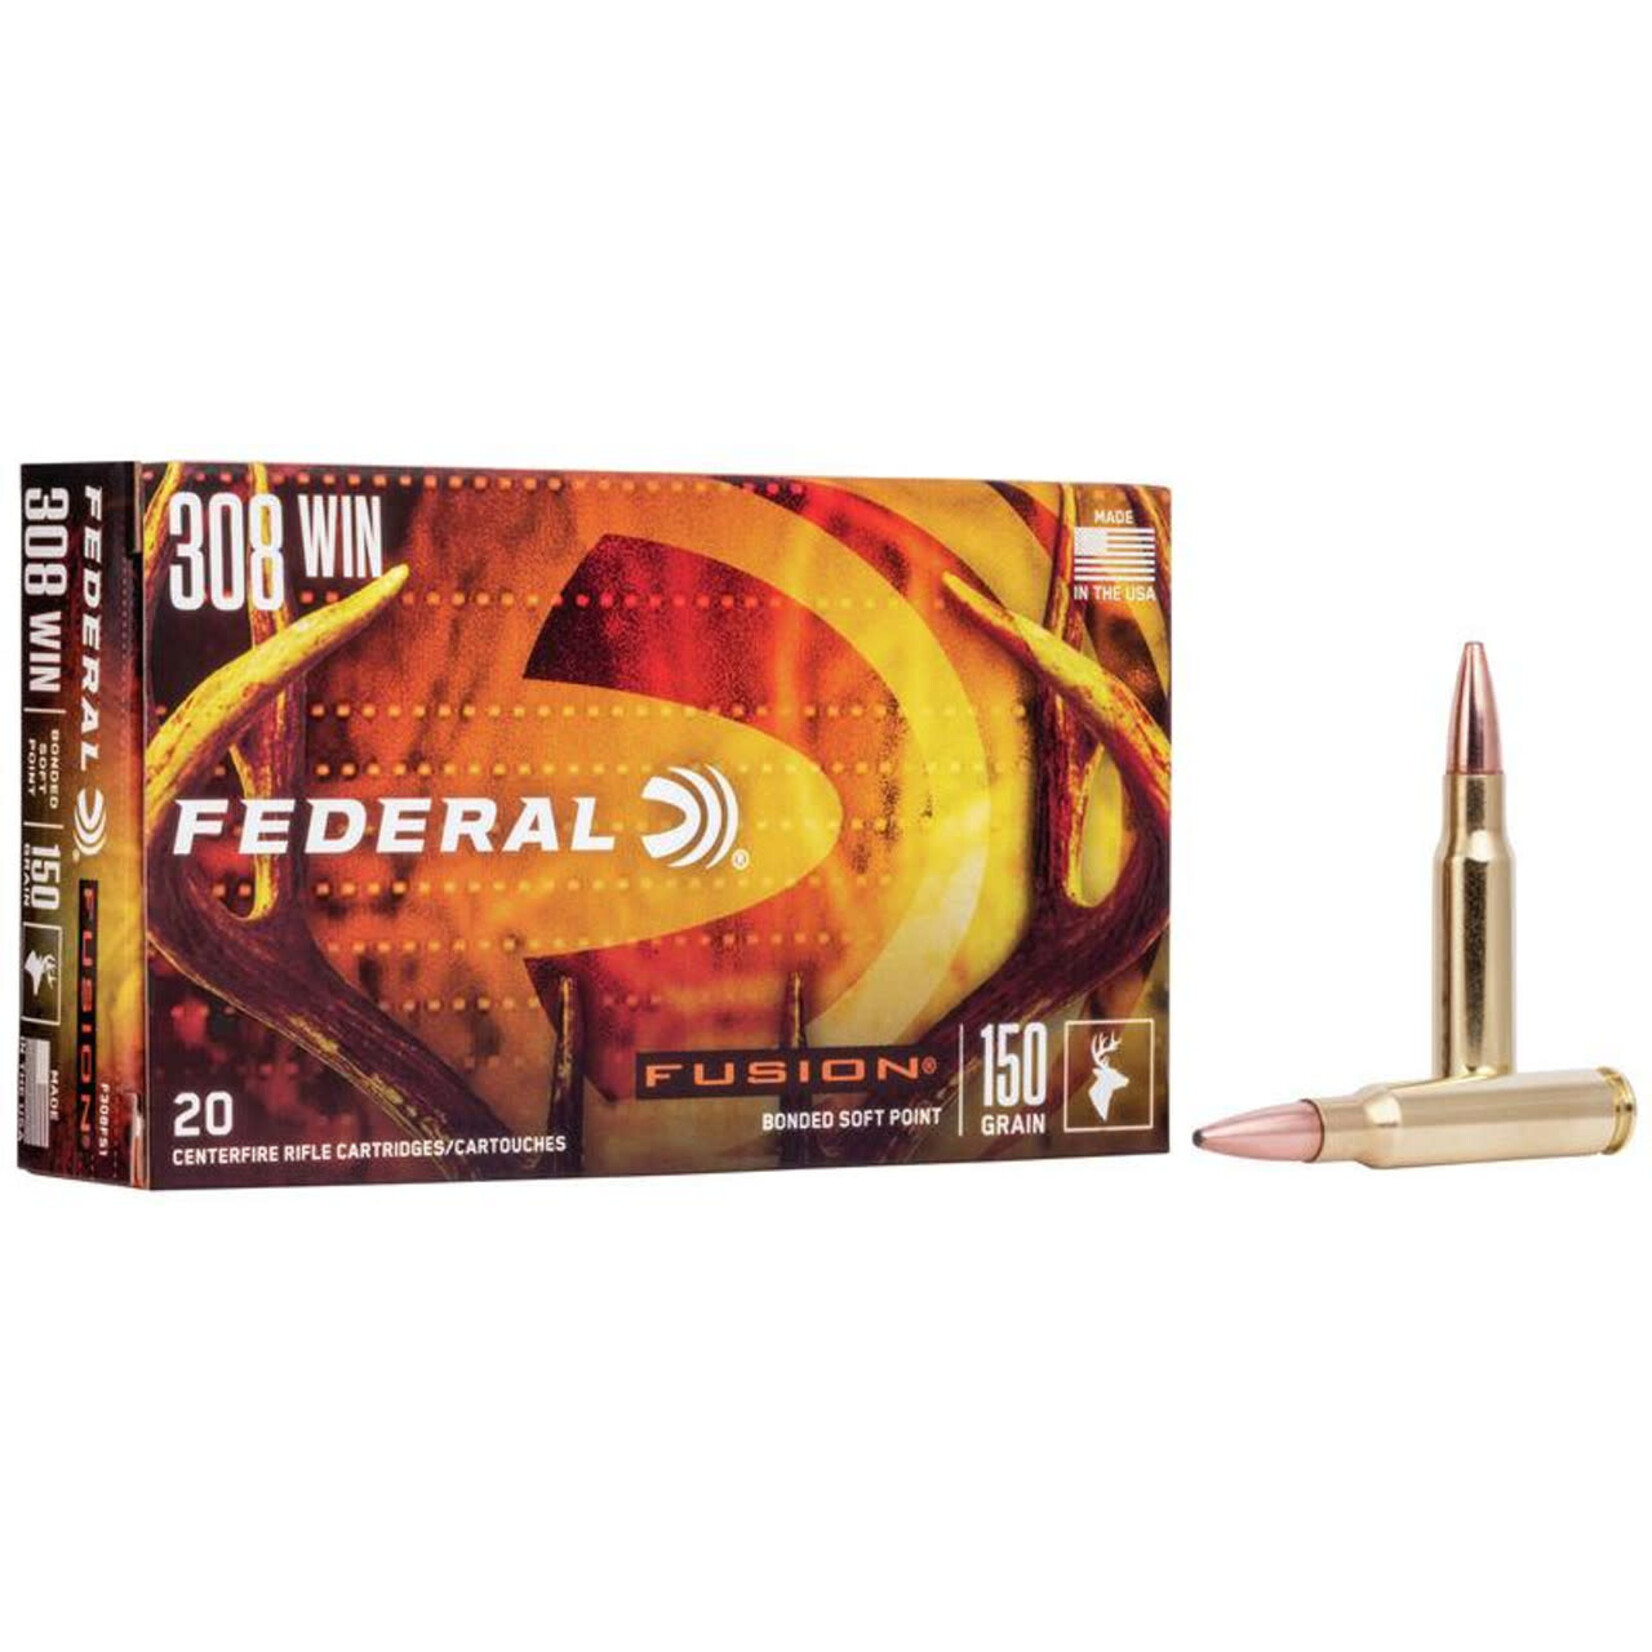 FEDERAL Munitions Federal Fusion Cal.308Win 150Gr